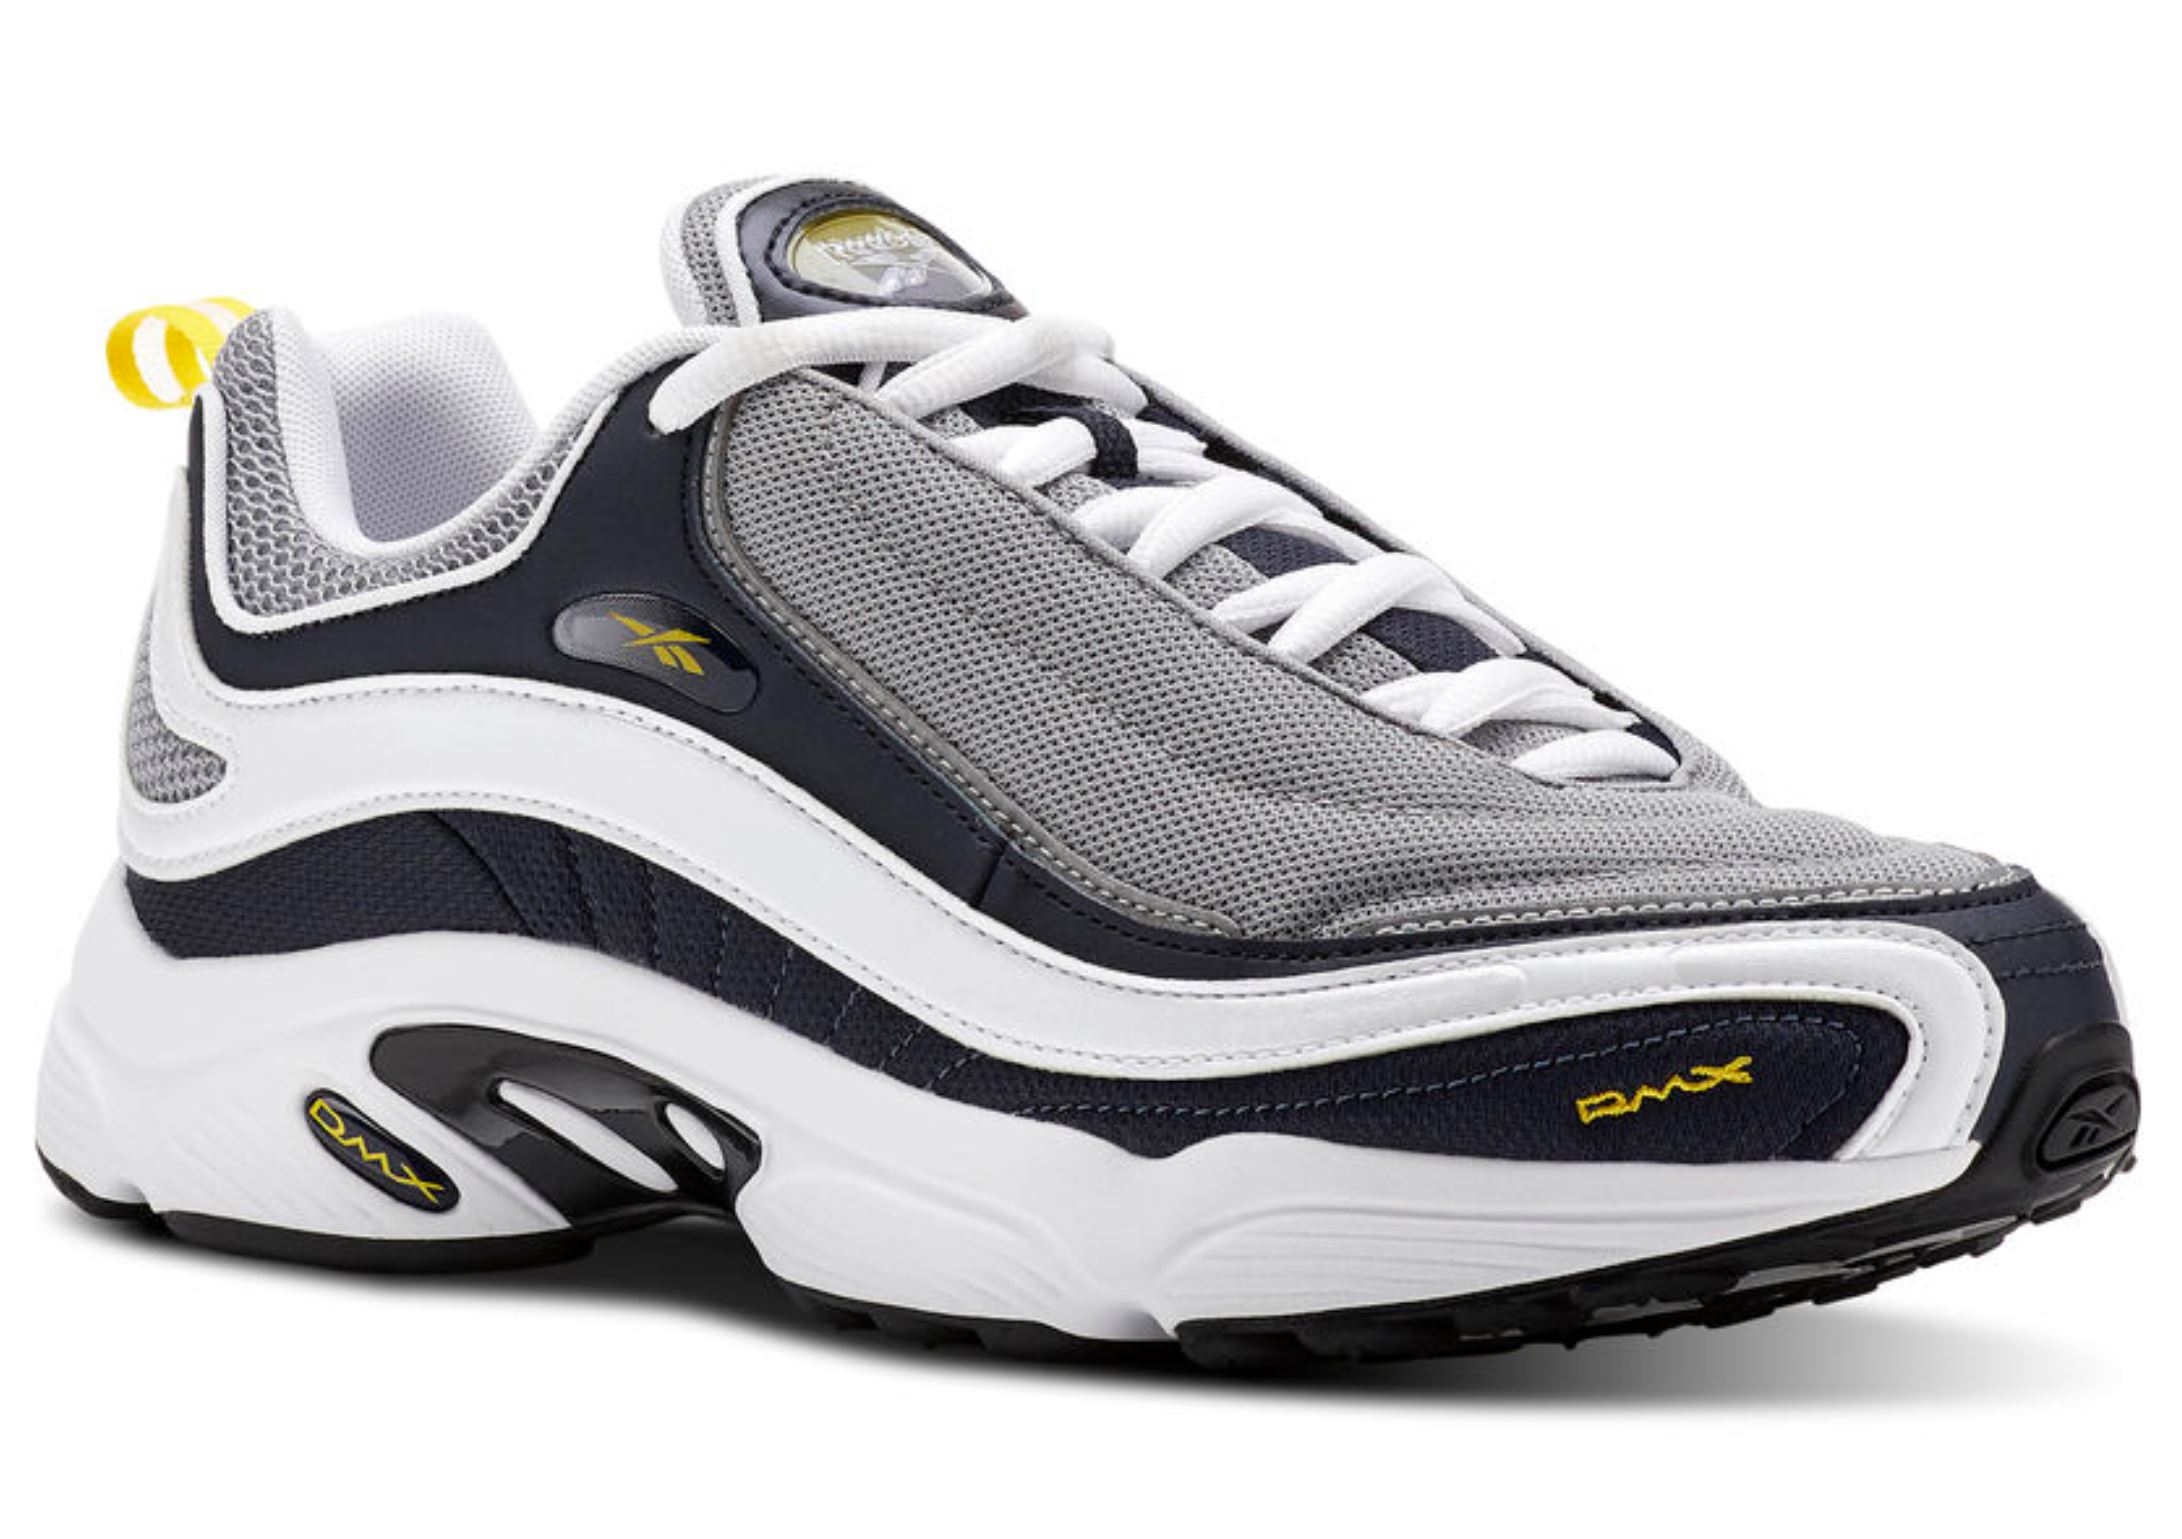 The Reebok Daytona DMX Has Returned to Retail After Two Decades 